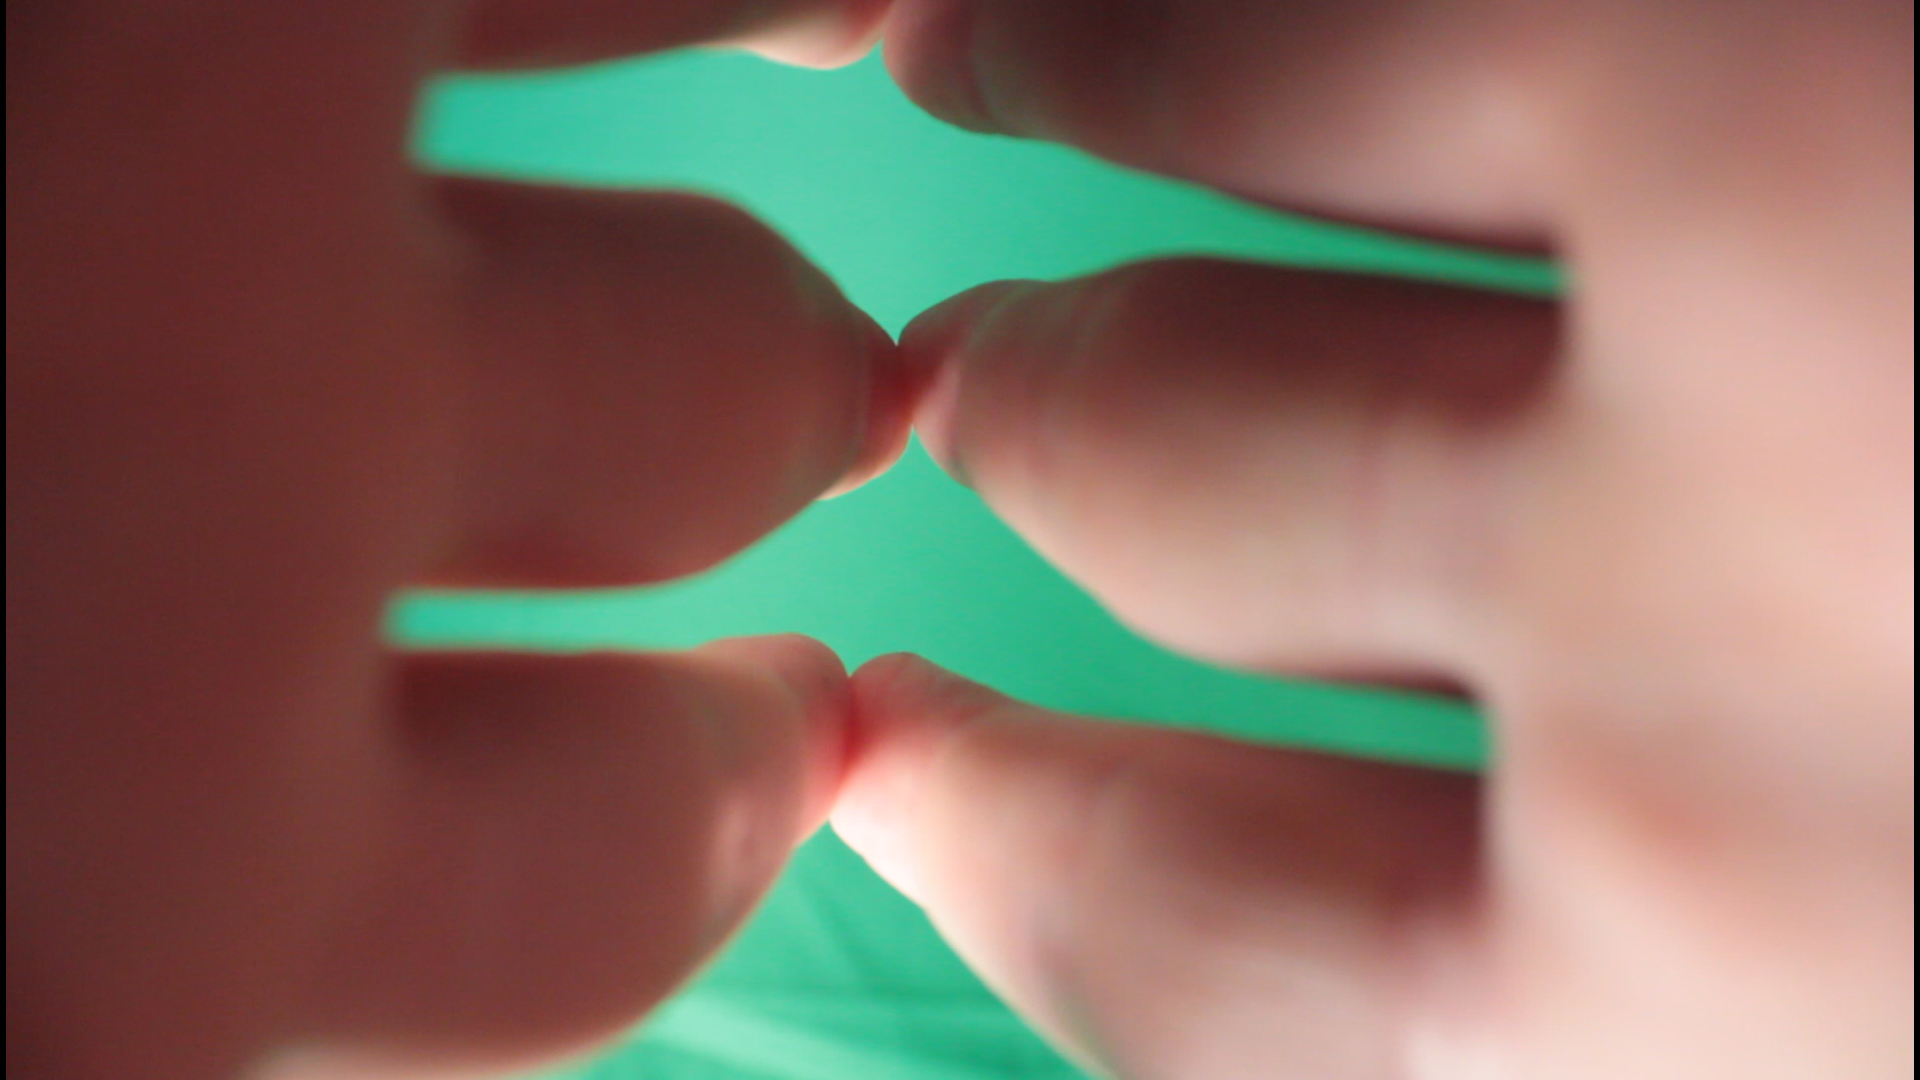 Two hands touch at the fingers, against a green background